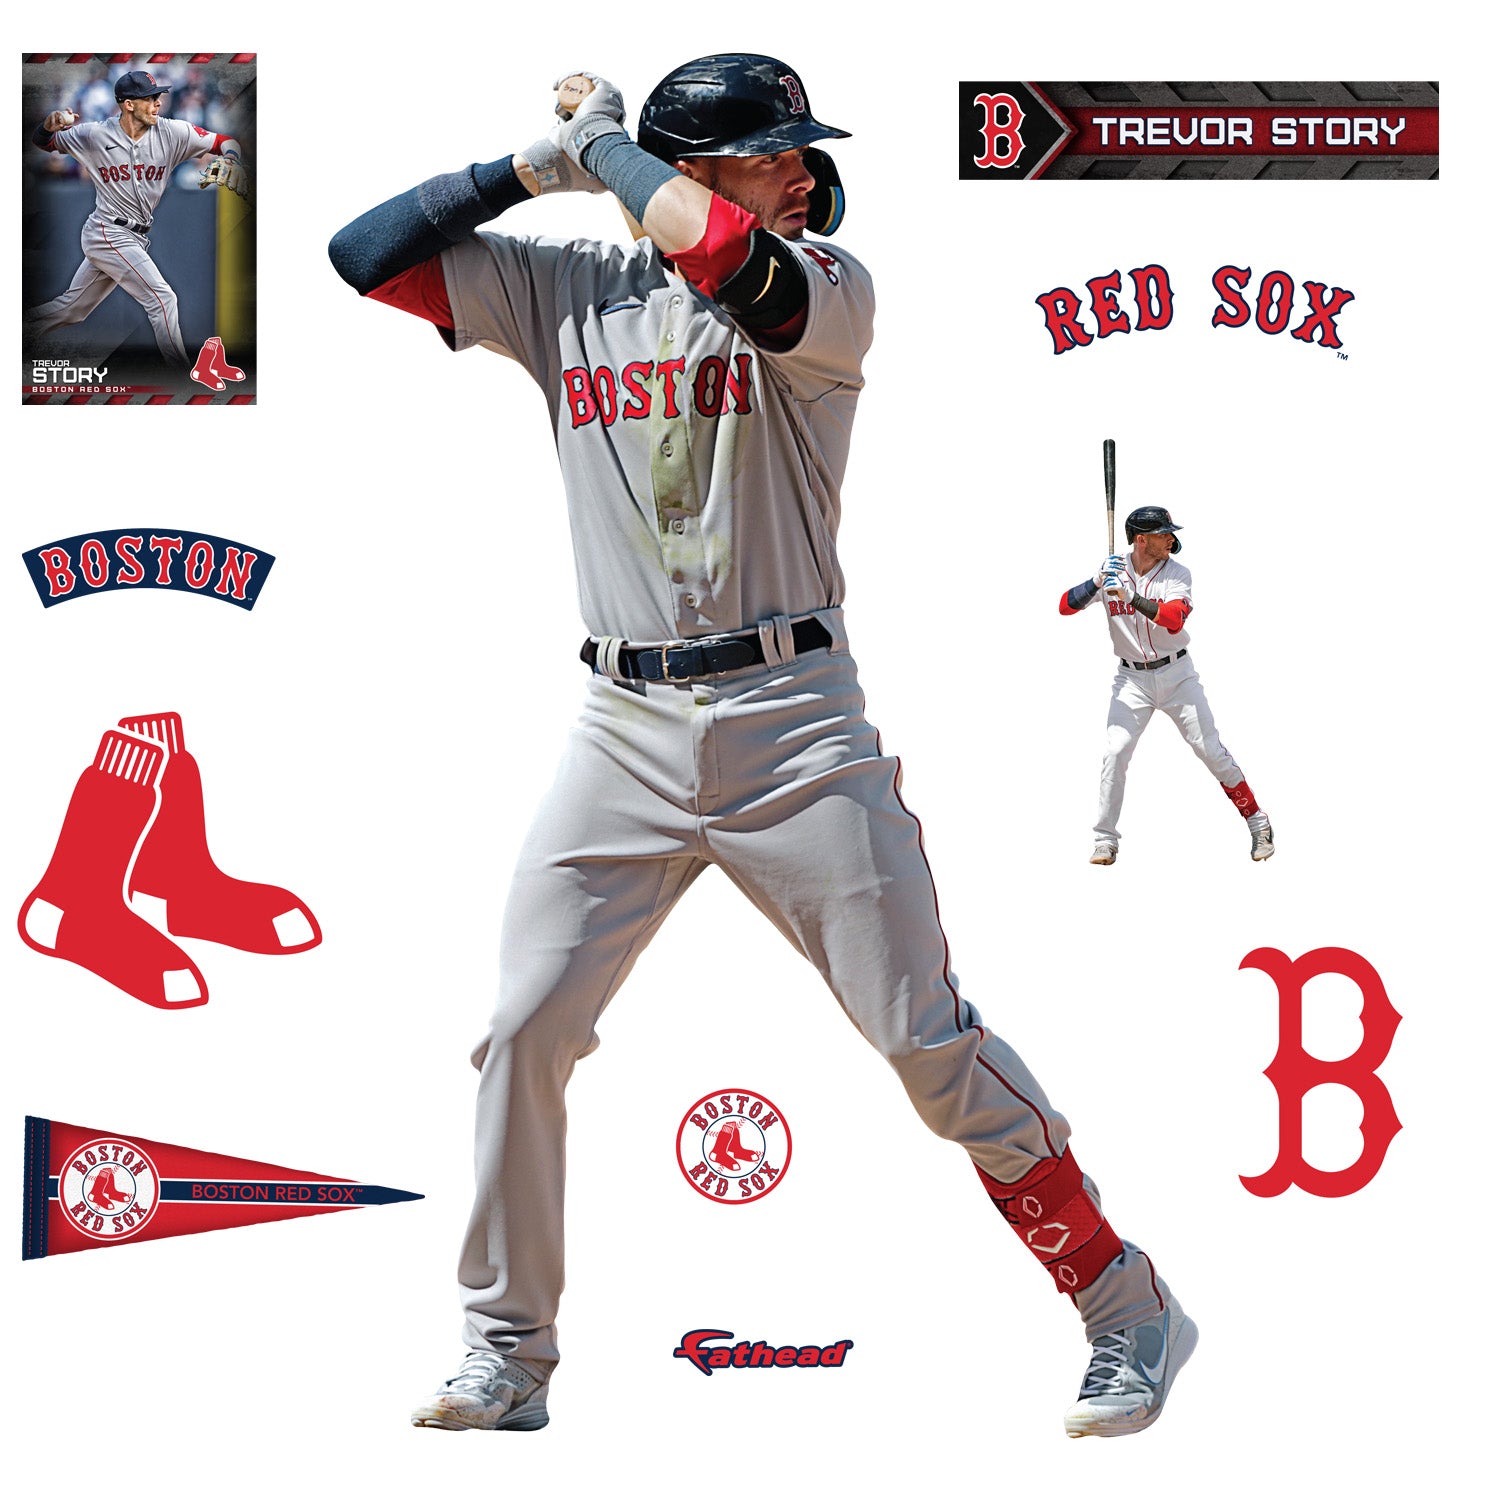 Dustin Pedroia for Boston Red Sox: Throwing - MLB Removable Wall Decal Giant Athlete + 2 Wall Decals 24W x 51H